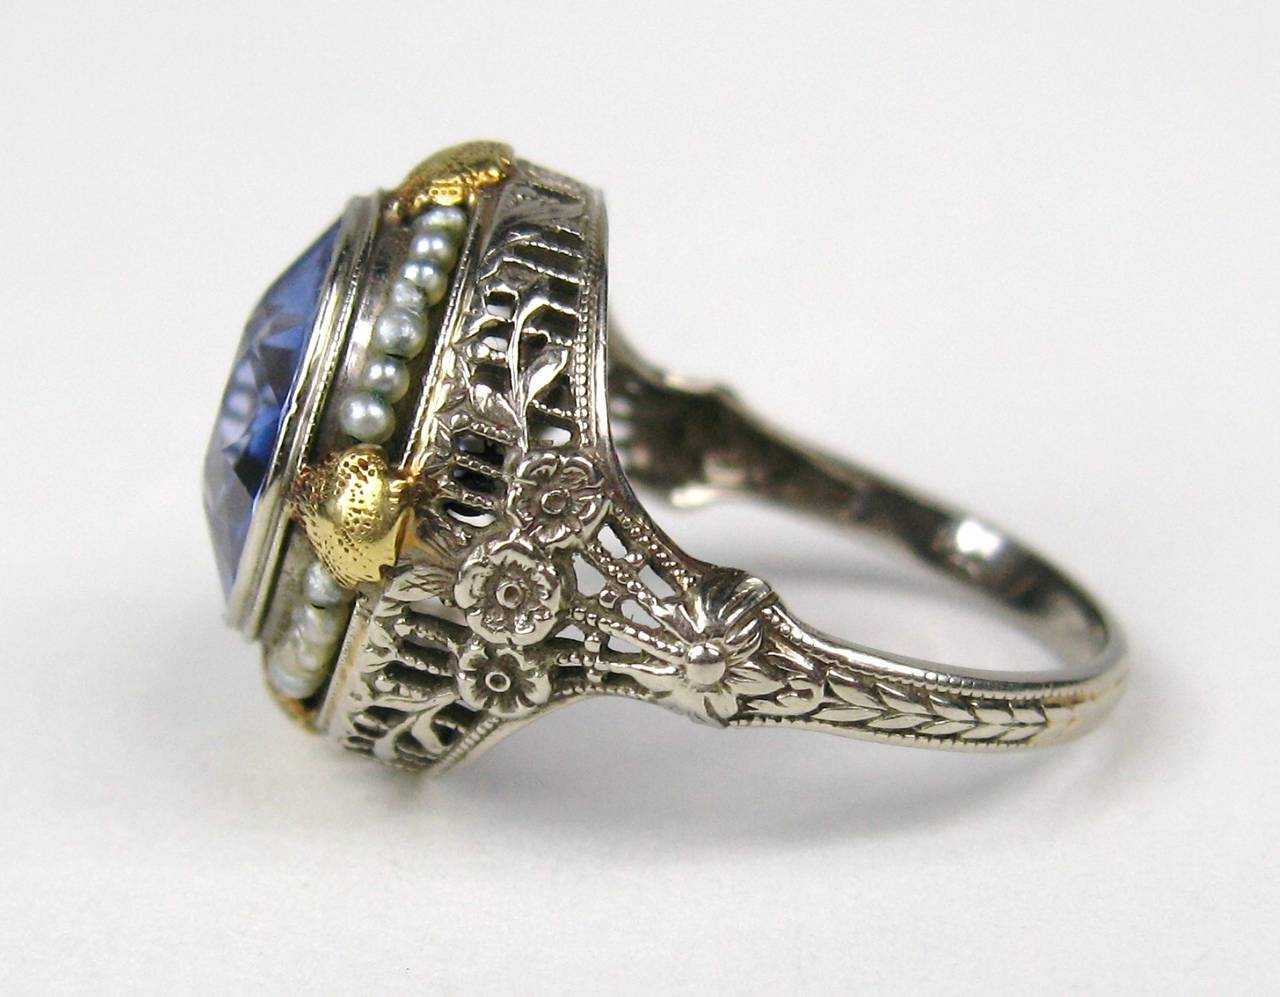 Set in 14K White gold with yellow gold accents. Bezel Set stunning Synthetic Blue Sapphire with tiny seed pearls surrounding Floral motif on the shank. The Ring is a size 7-3/4 and can be sized by us or your jeweler. This is out of a massive